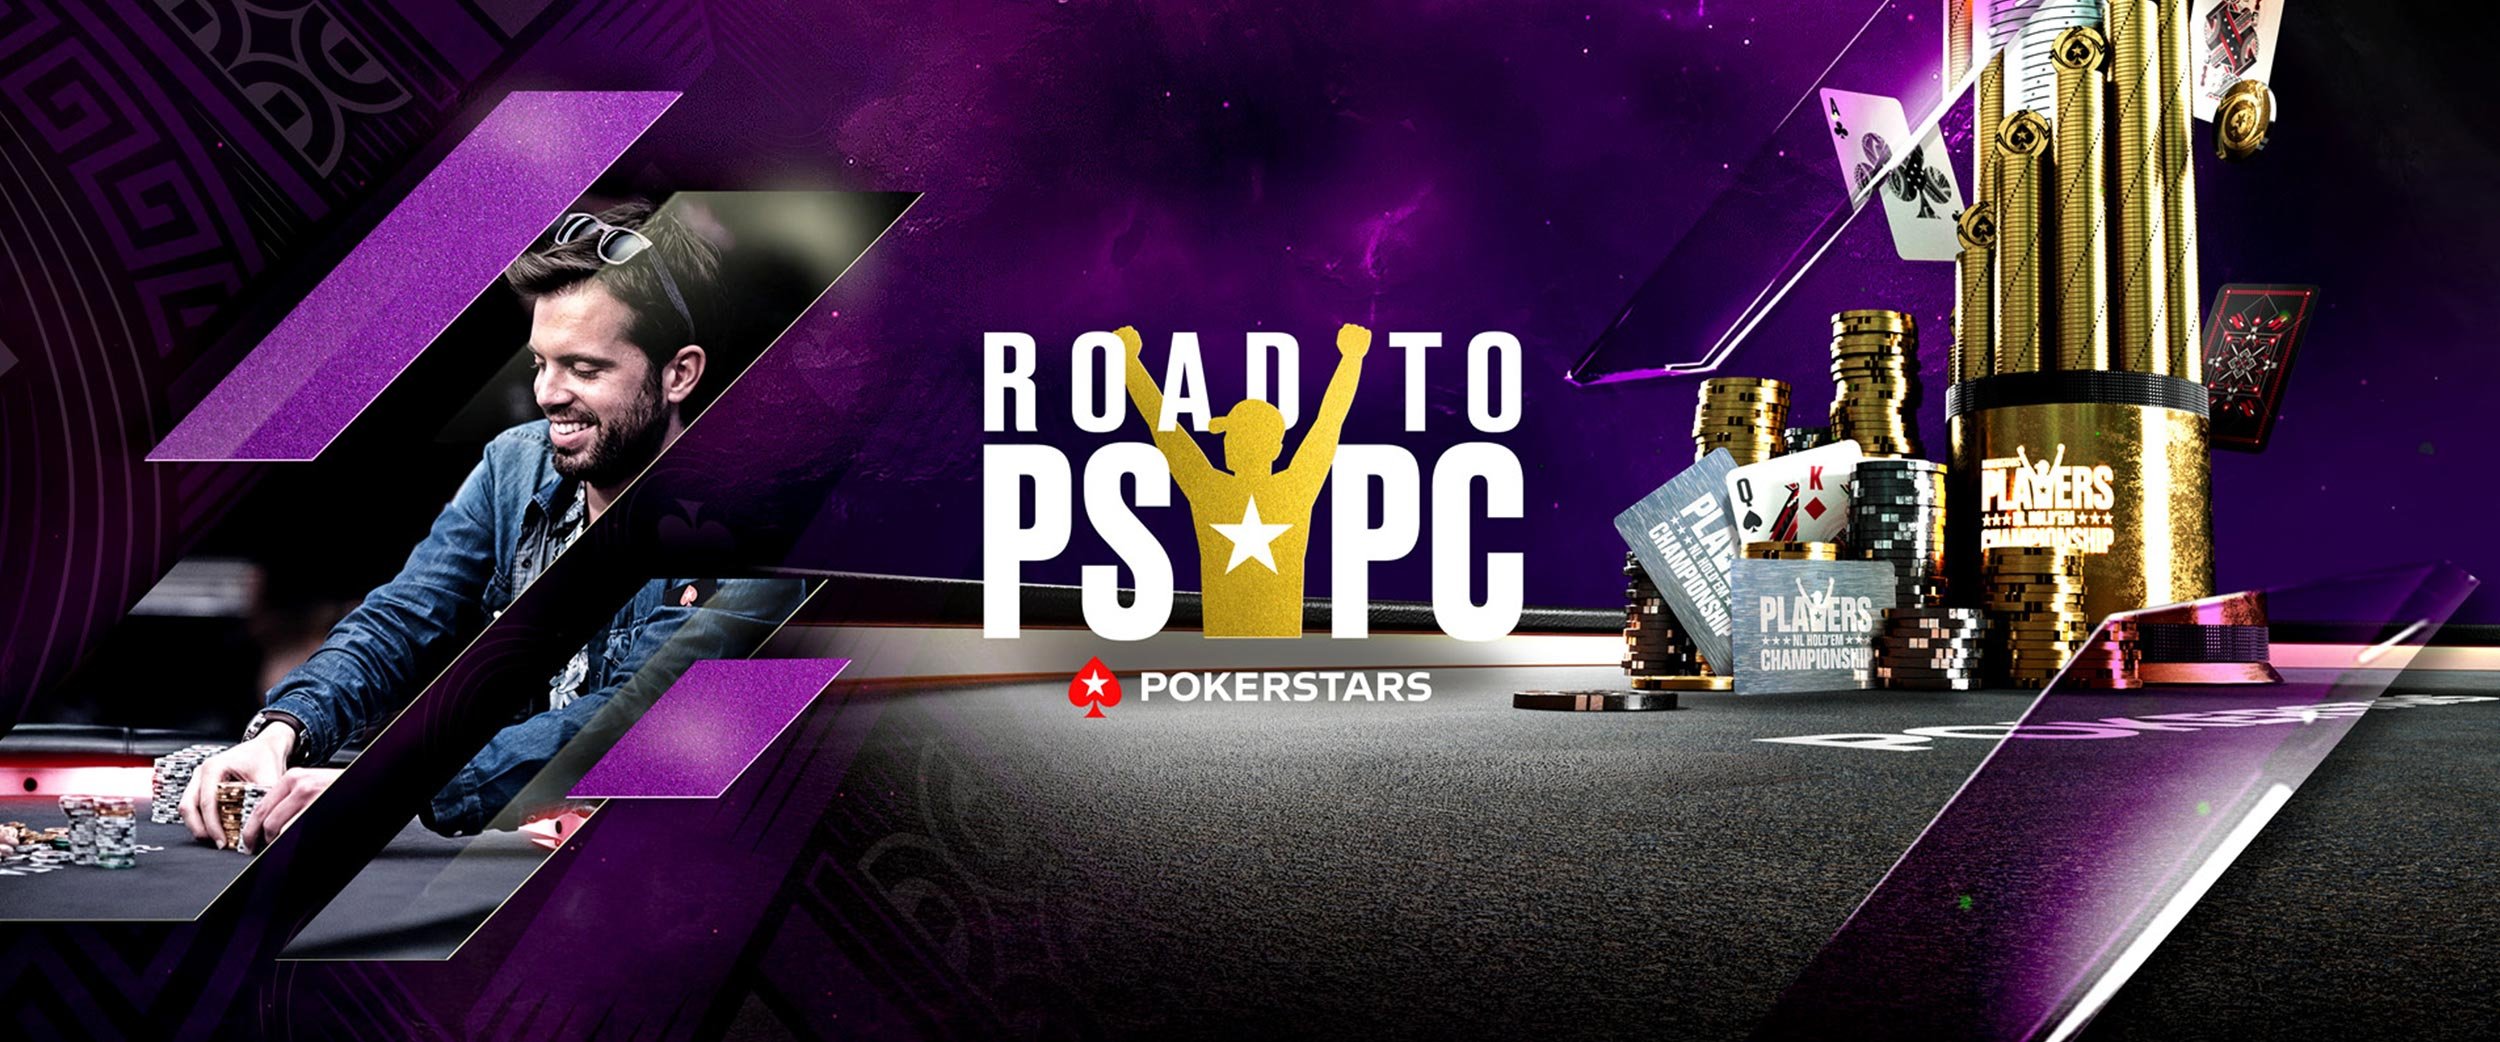 PS_Players_Championship_Content_Road_to_PSPC.jpg